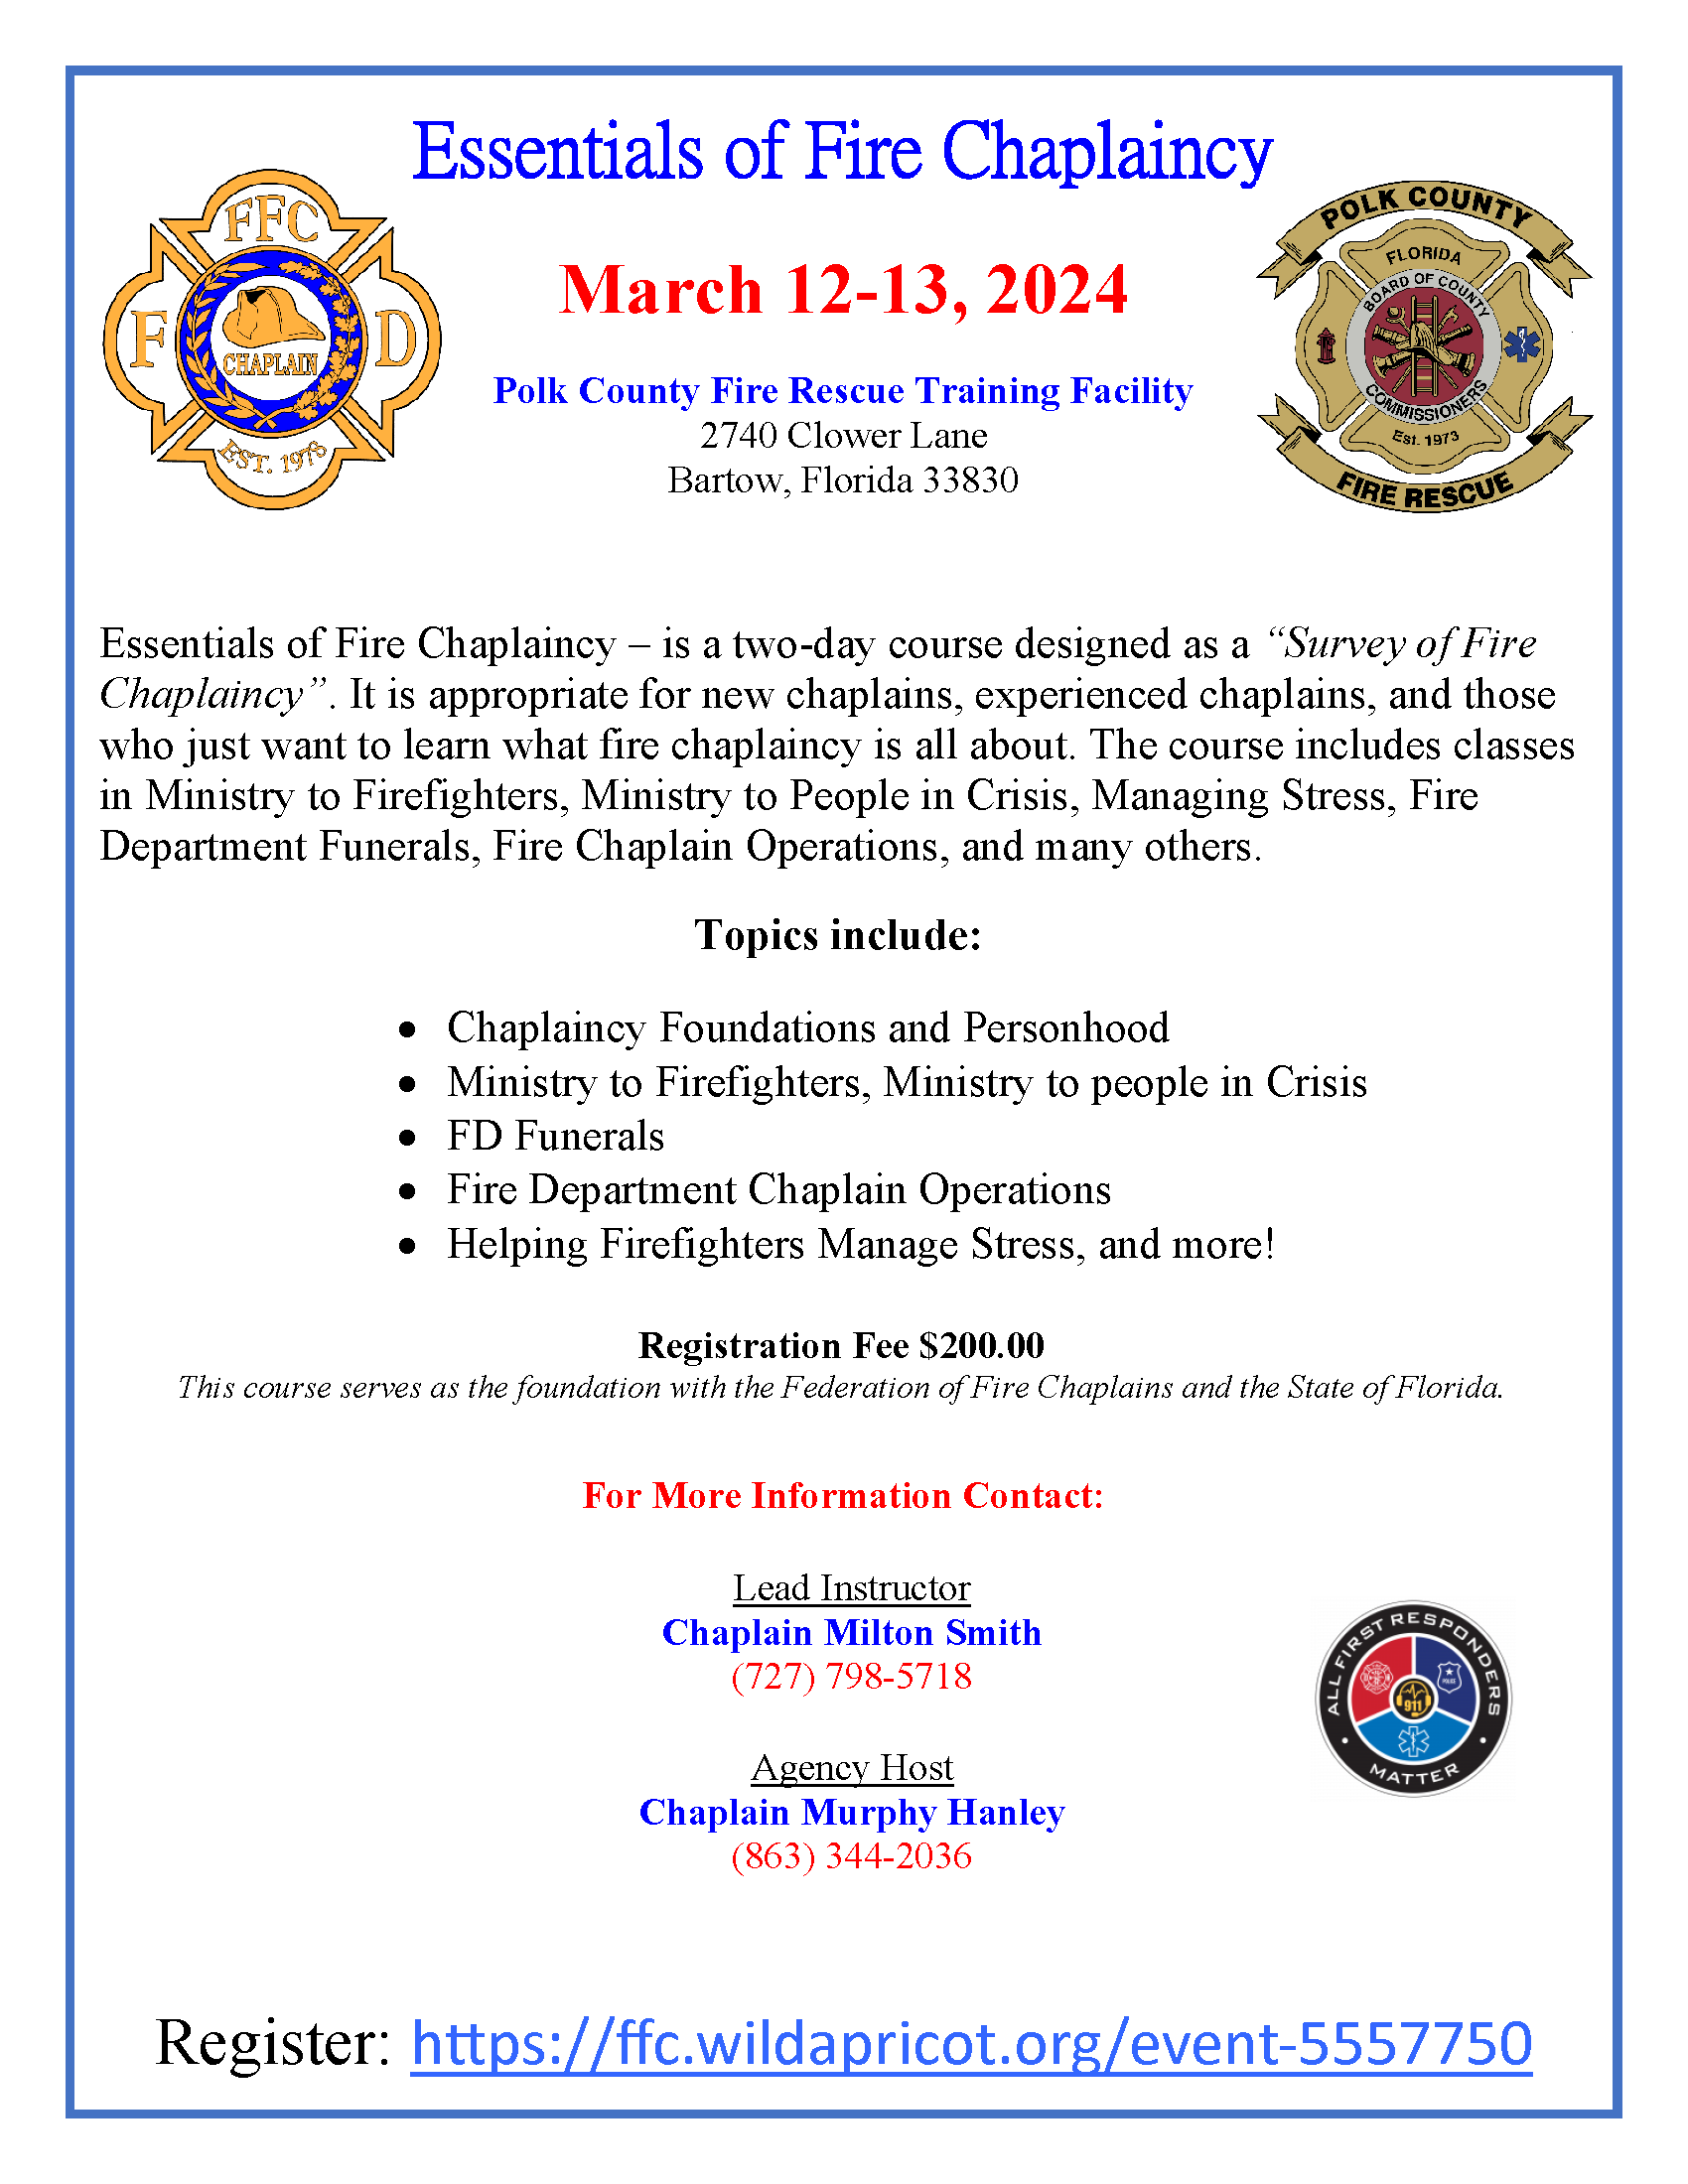 image-994437-Essentails_of_Fire_Chaplaincy,_Polk_County_Fire_Rescue_March_12_-_13,_2024-8f14e.png